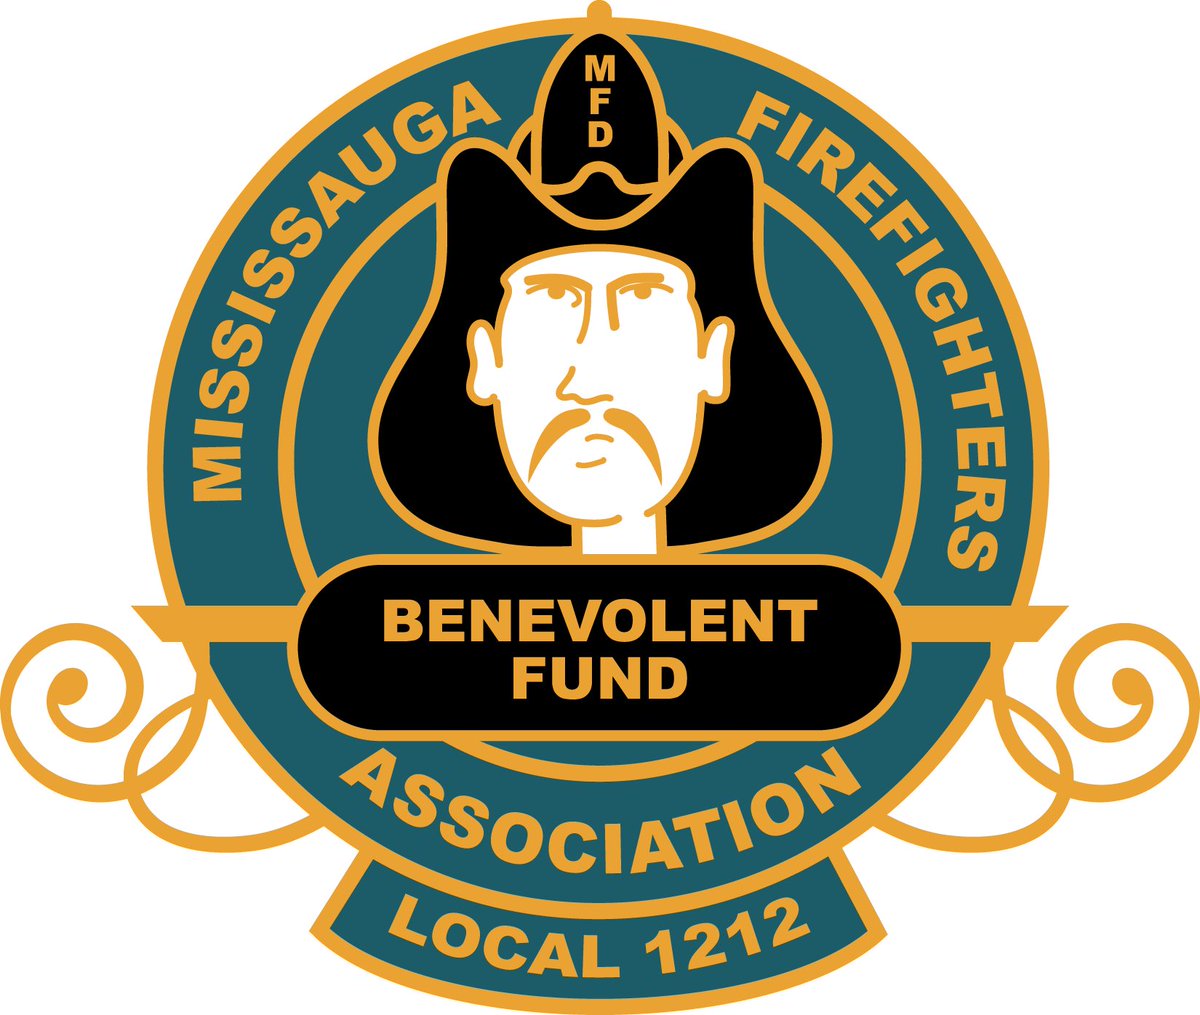 Camp BUCKO would like to thank the Mississauga Firefighters Association - Benevolent Fund for their generous donation as well as their ongoing support! We appreciate our sponsors so much! 💙🚒 #CampBucko #childrenscharity #burnsurvivors